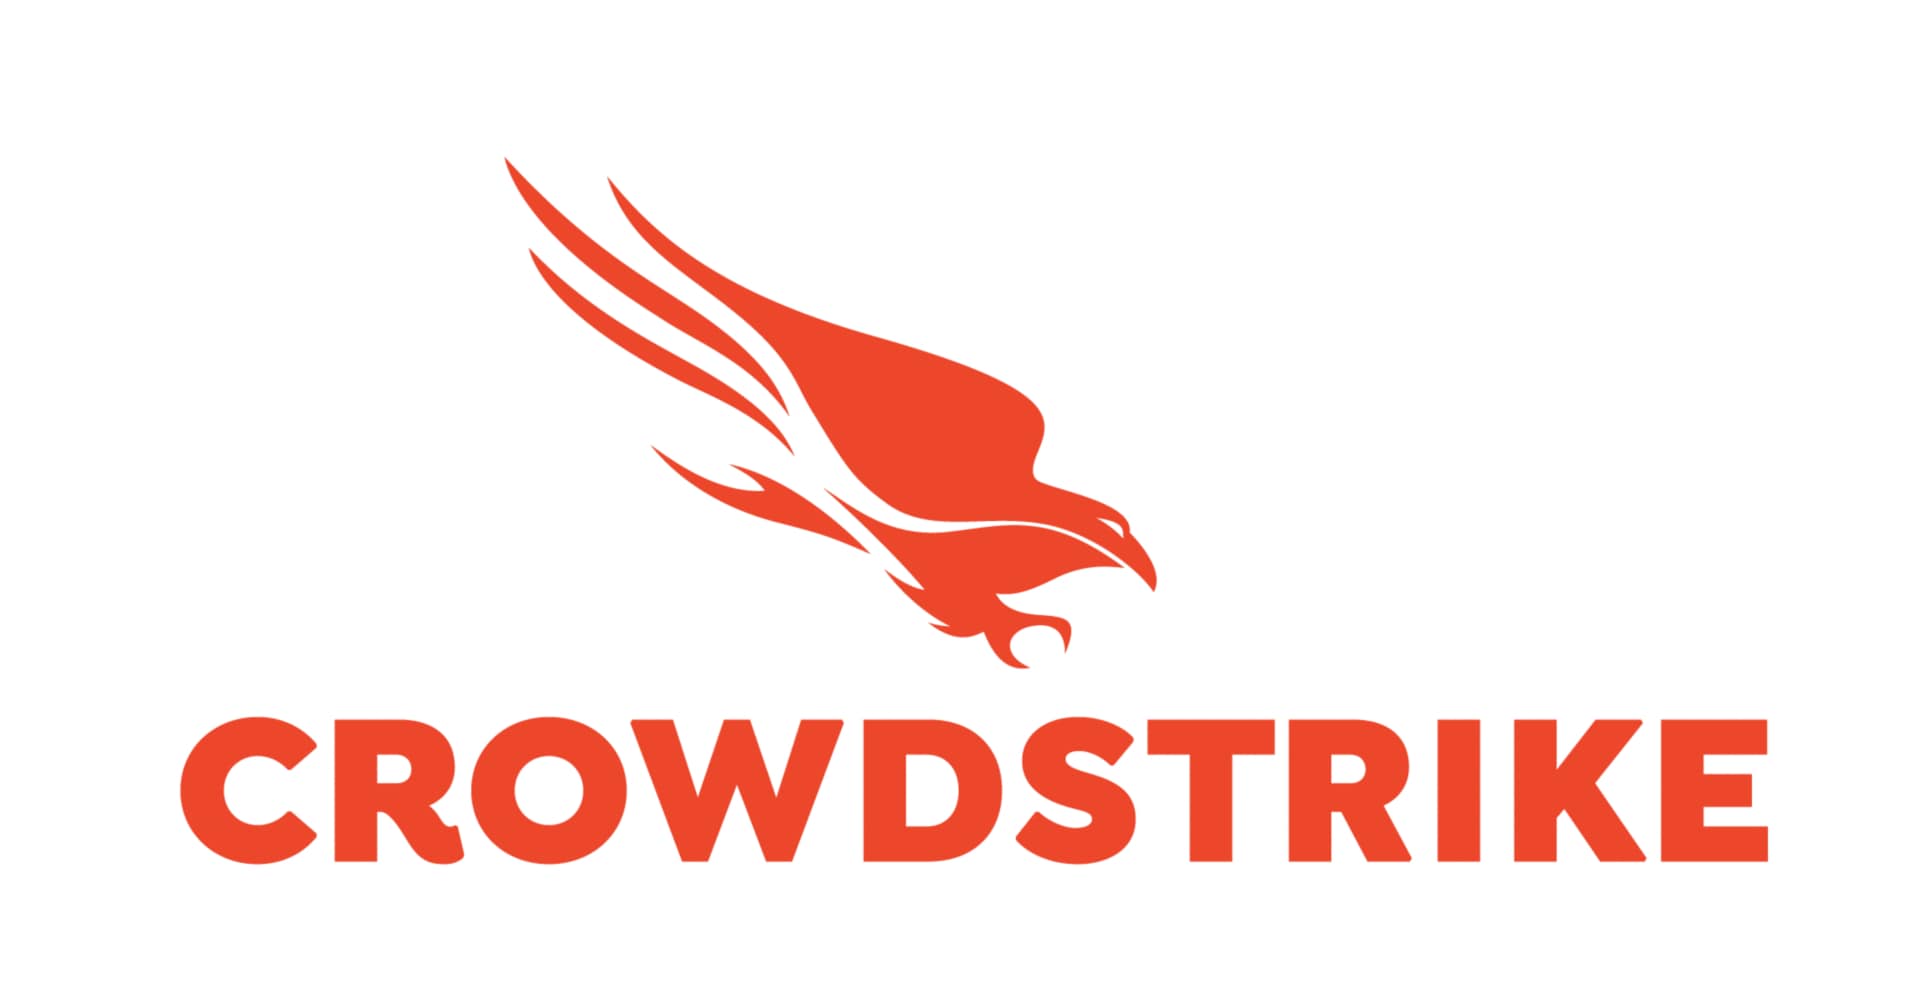 CrowdStrike Server Threat Graph Extended Plus - On Demand Software